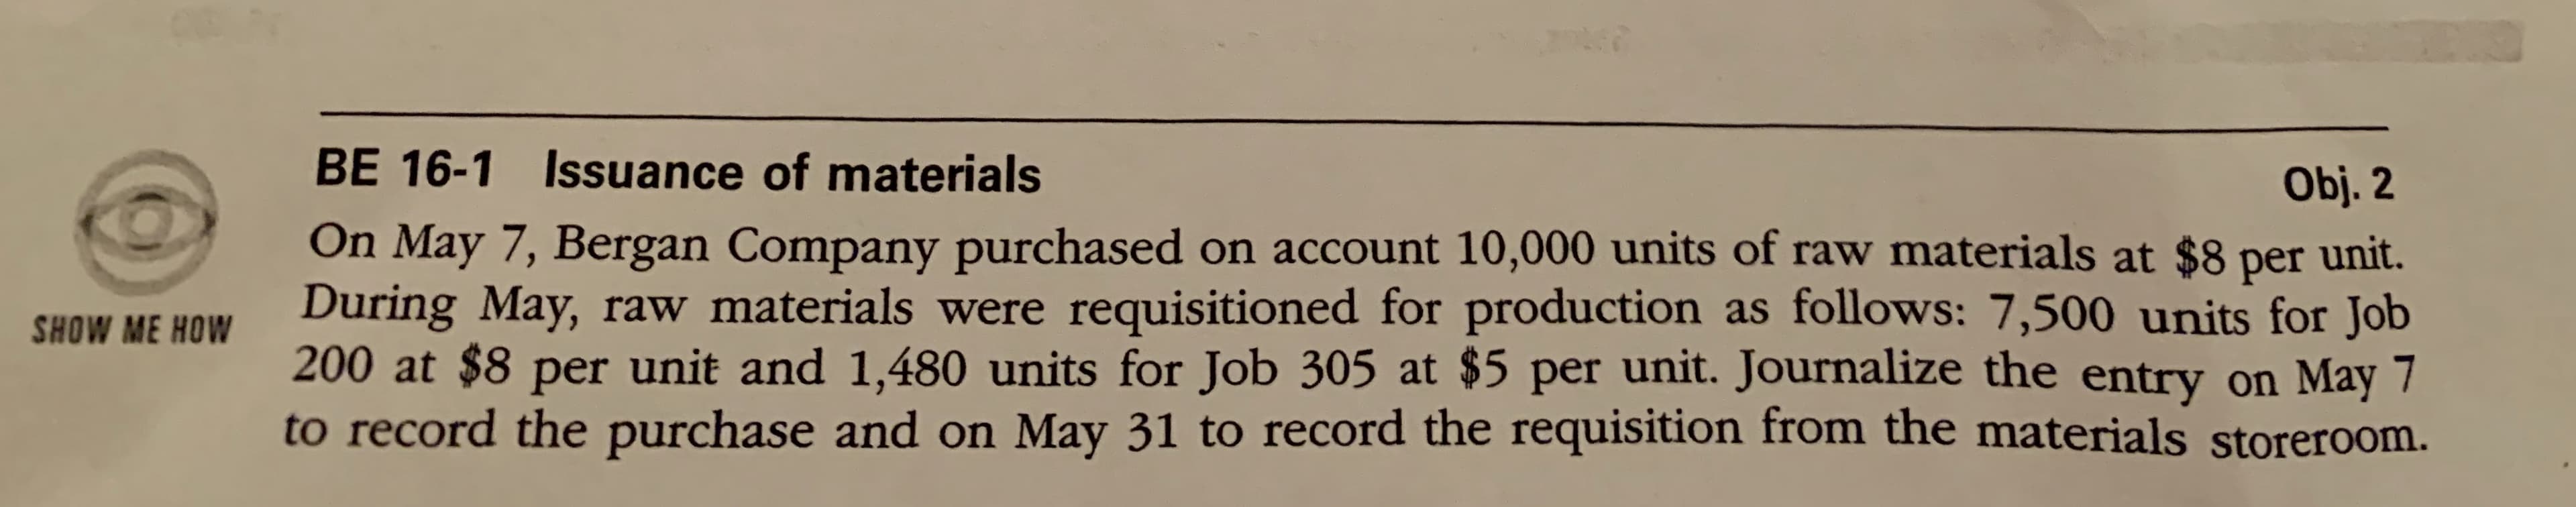 BE 16-1 Issuance of materials
Obj. 2
On May 7, Bergan Company purchased on account 10,000 units of raw materials at $8
unit.
per
During May, raw materials were requisitioned for production as follows: 7,500 units for Job
200 at $8 per unit and 1,480 units for Job 305 at $5 per unit. Journalize the entry on May 7
to record the purchase and on May 31 to record the requisition from the materials storeroom.
SHOW ME HOW
